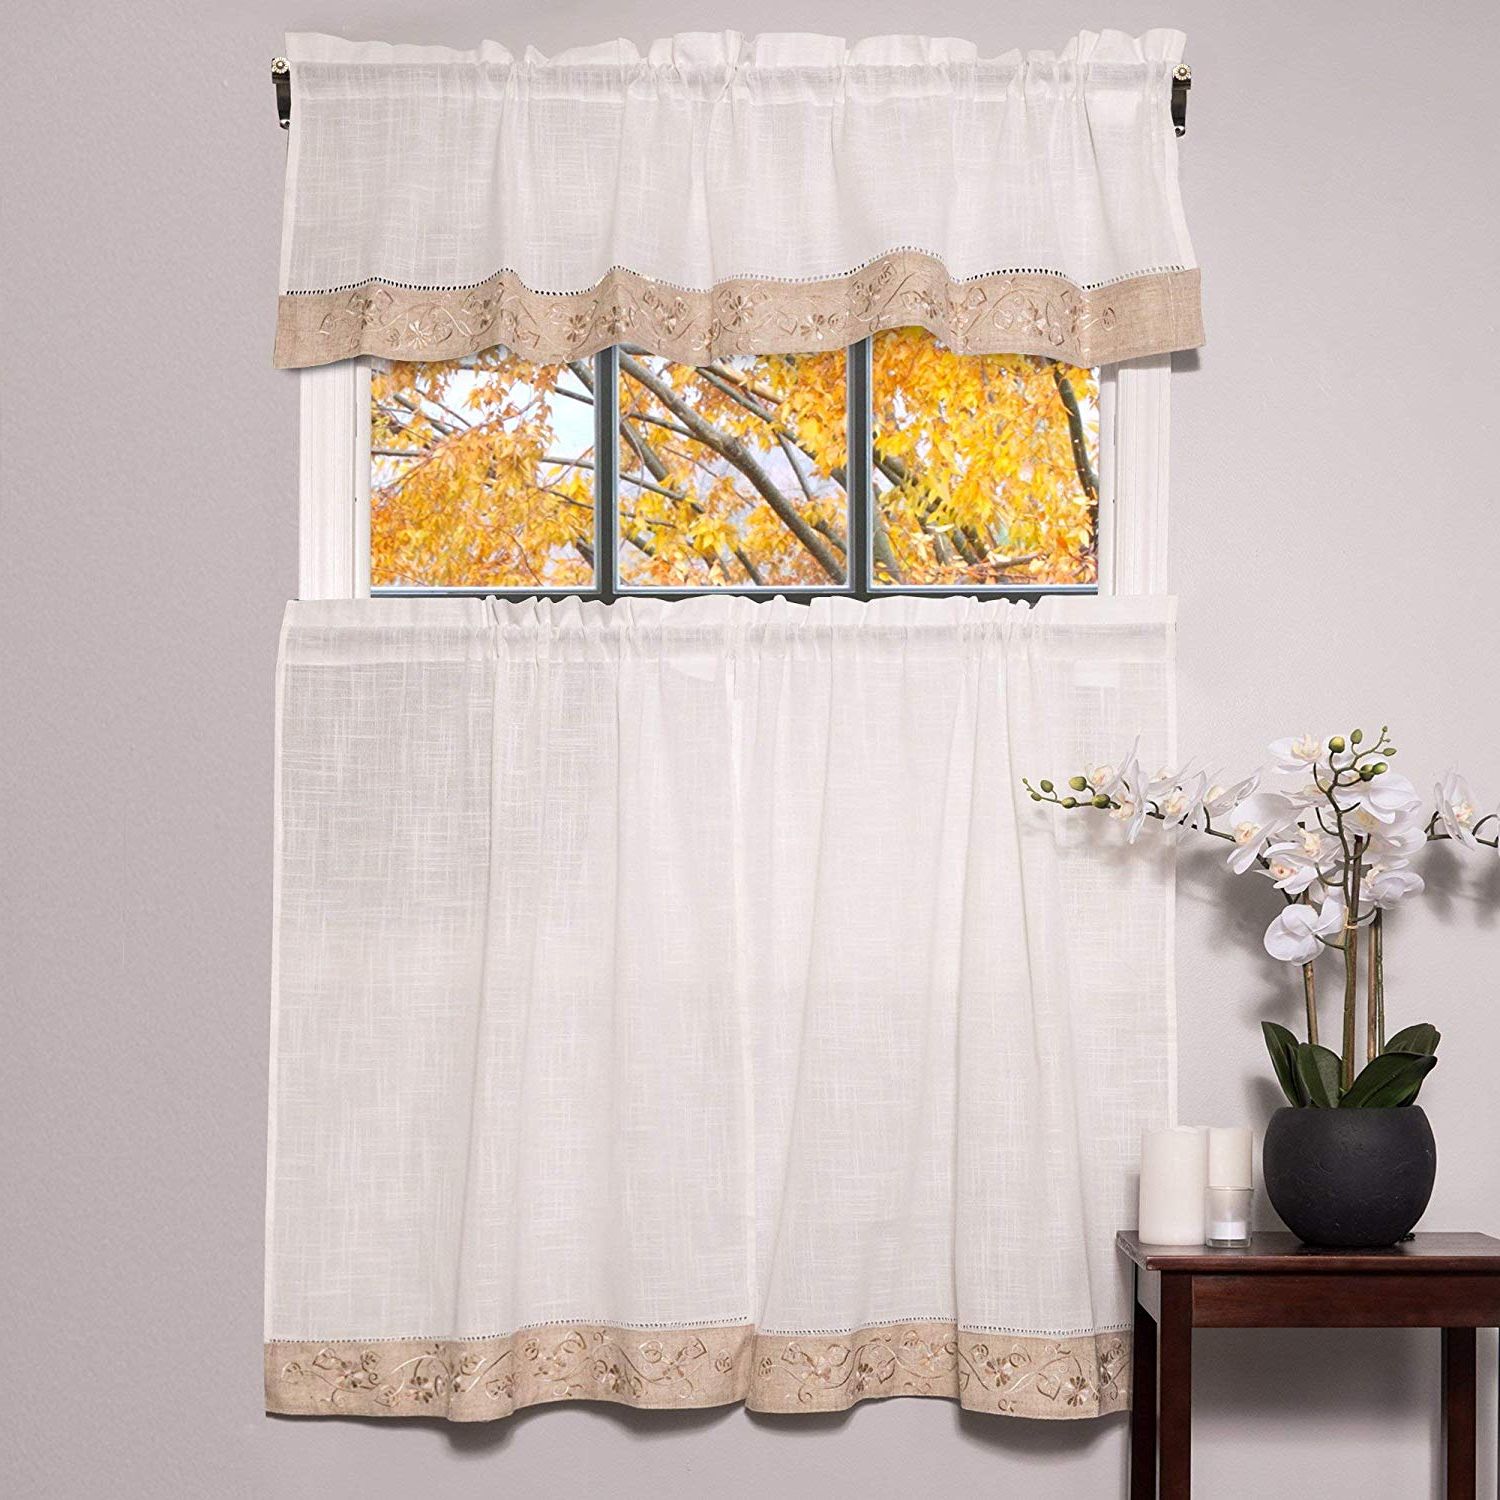 Amazon: Bed Bath N More Oakwood Linen Style Decorative Intended For 2020 Oakwood Linen Style Decorative Curtain Tier Sets (View 5 of 20)